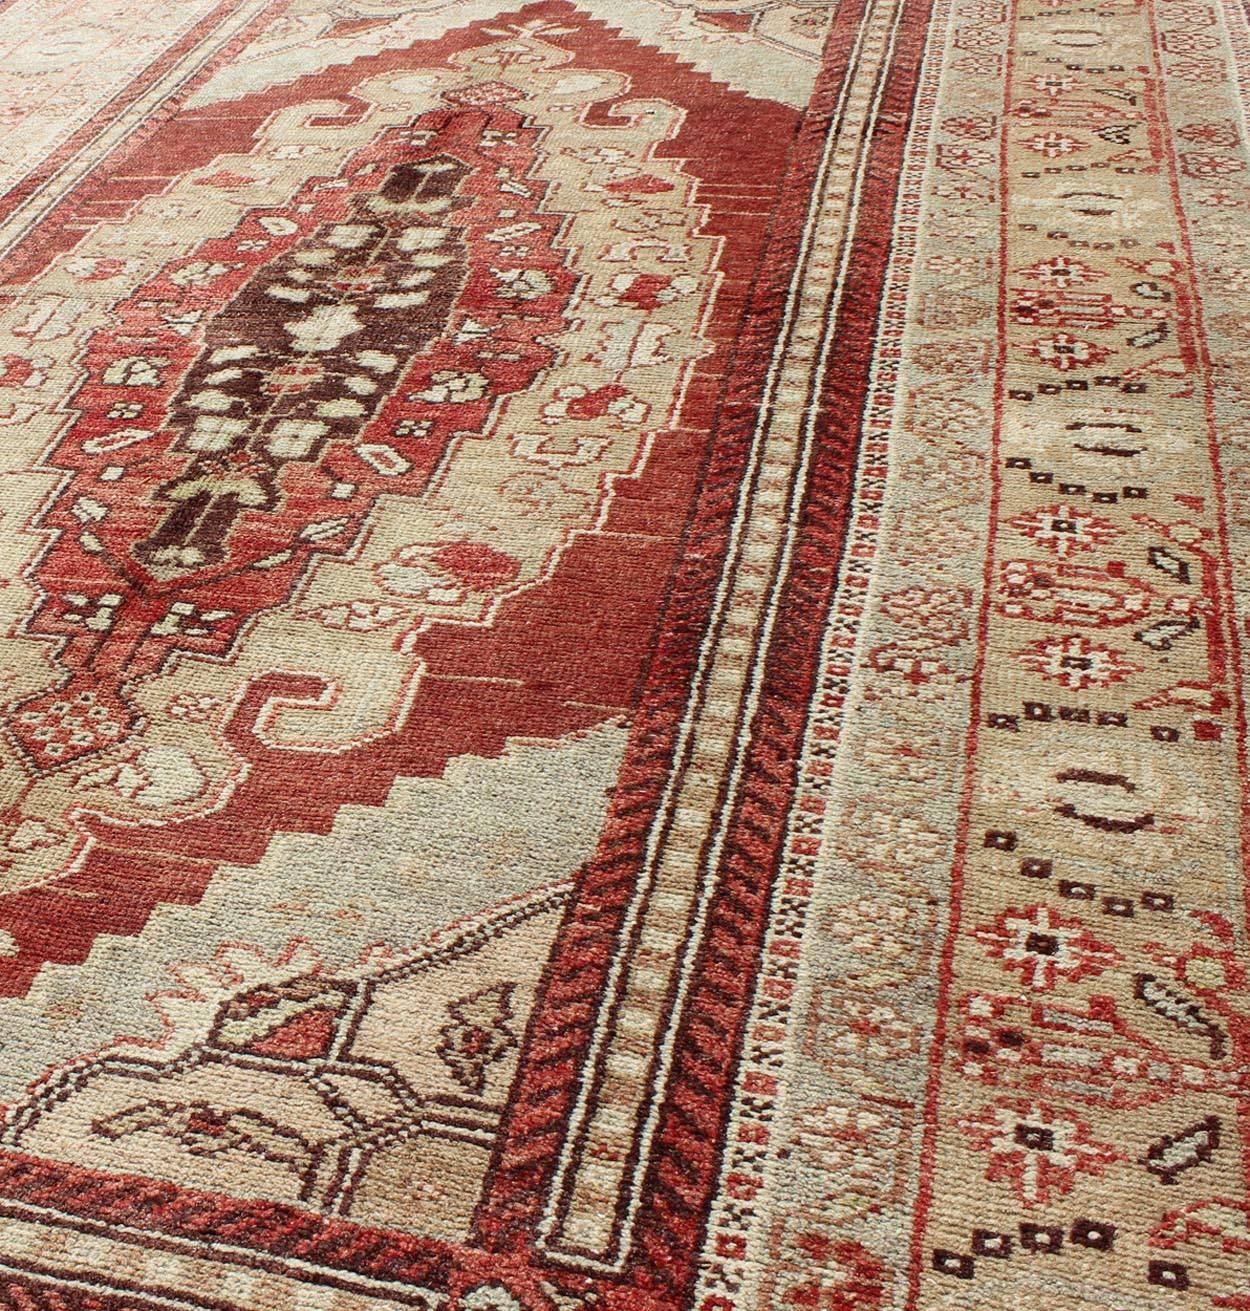 20th Century Antique Turkish Oushak Rug with Red, Taupe, Light Green, Cream, Brown & Neutrals For Sale